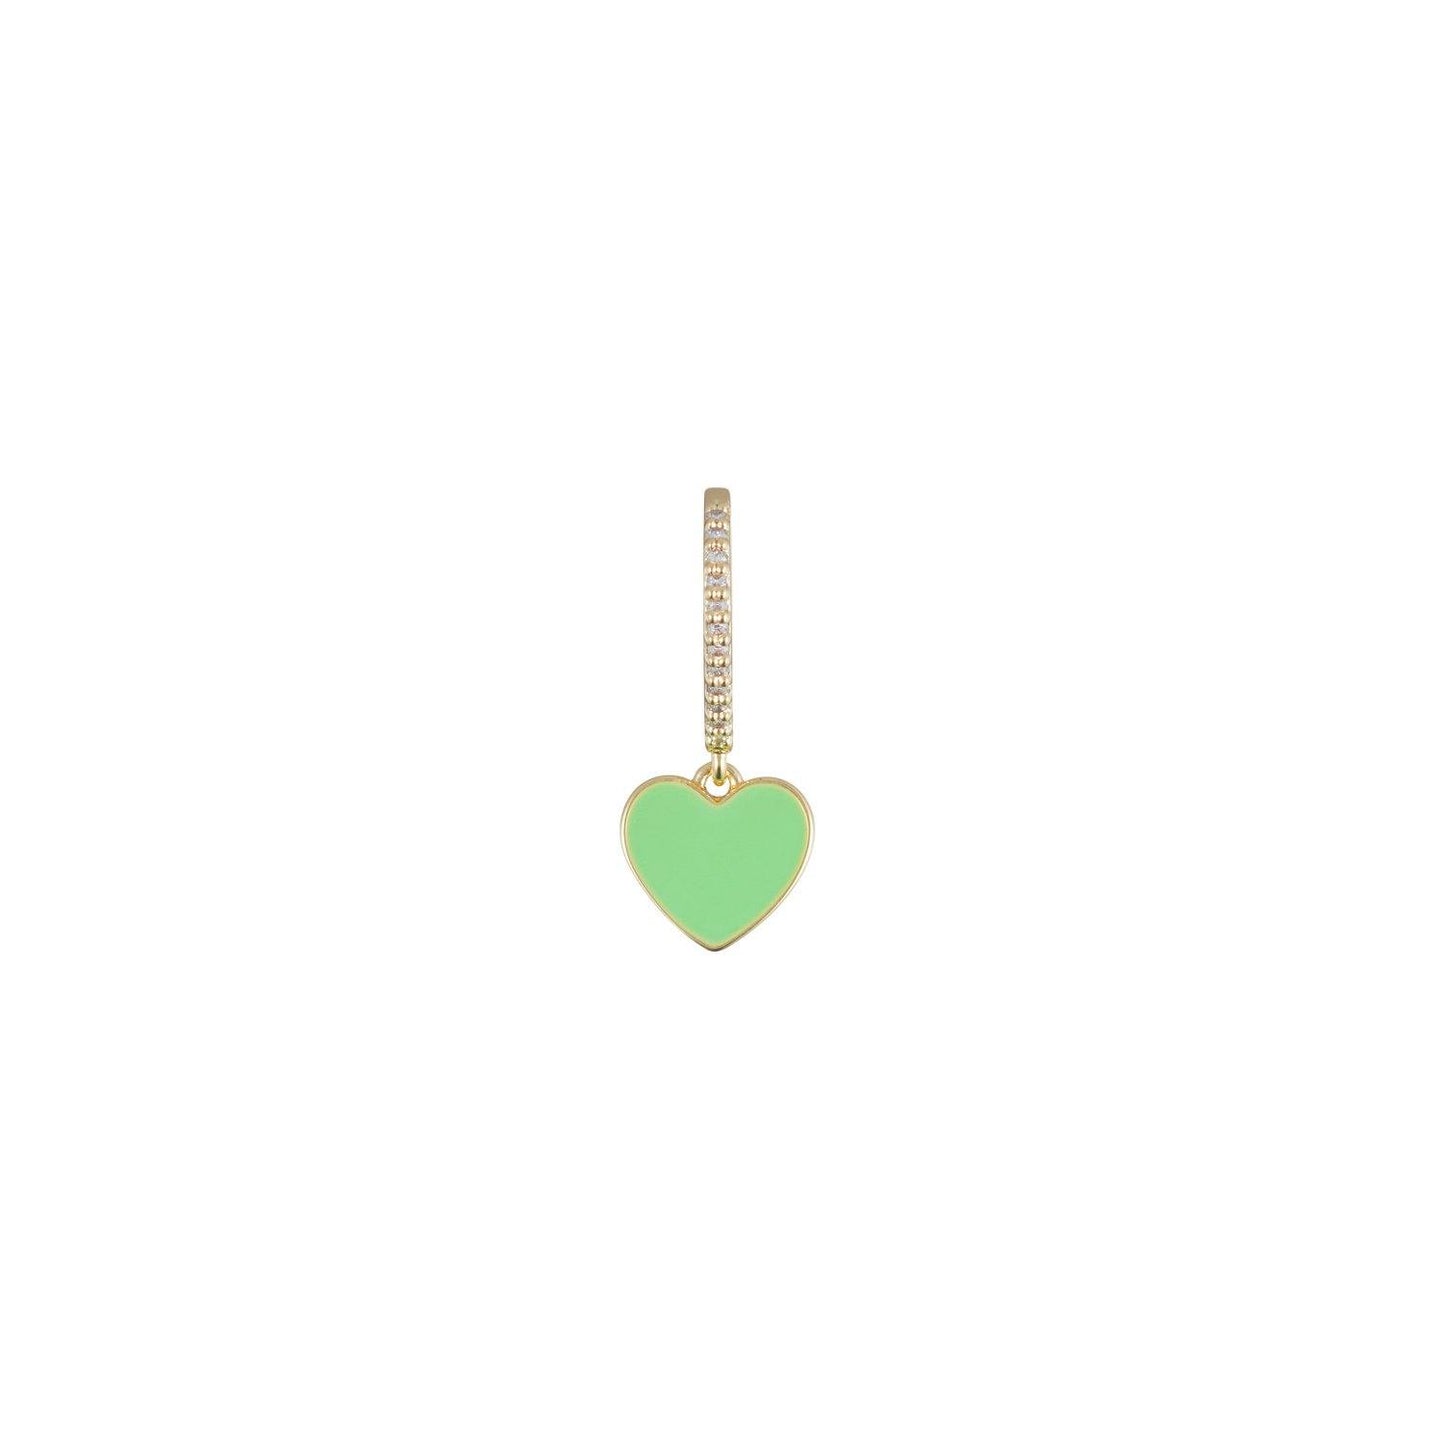 Green enamel heart shaped pendant with clear stone embellishments 